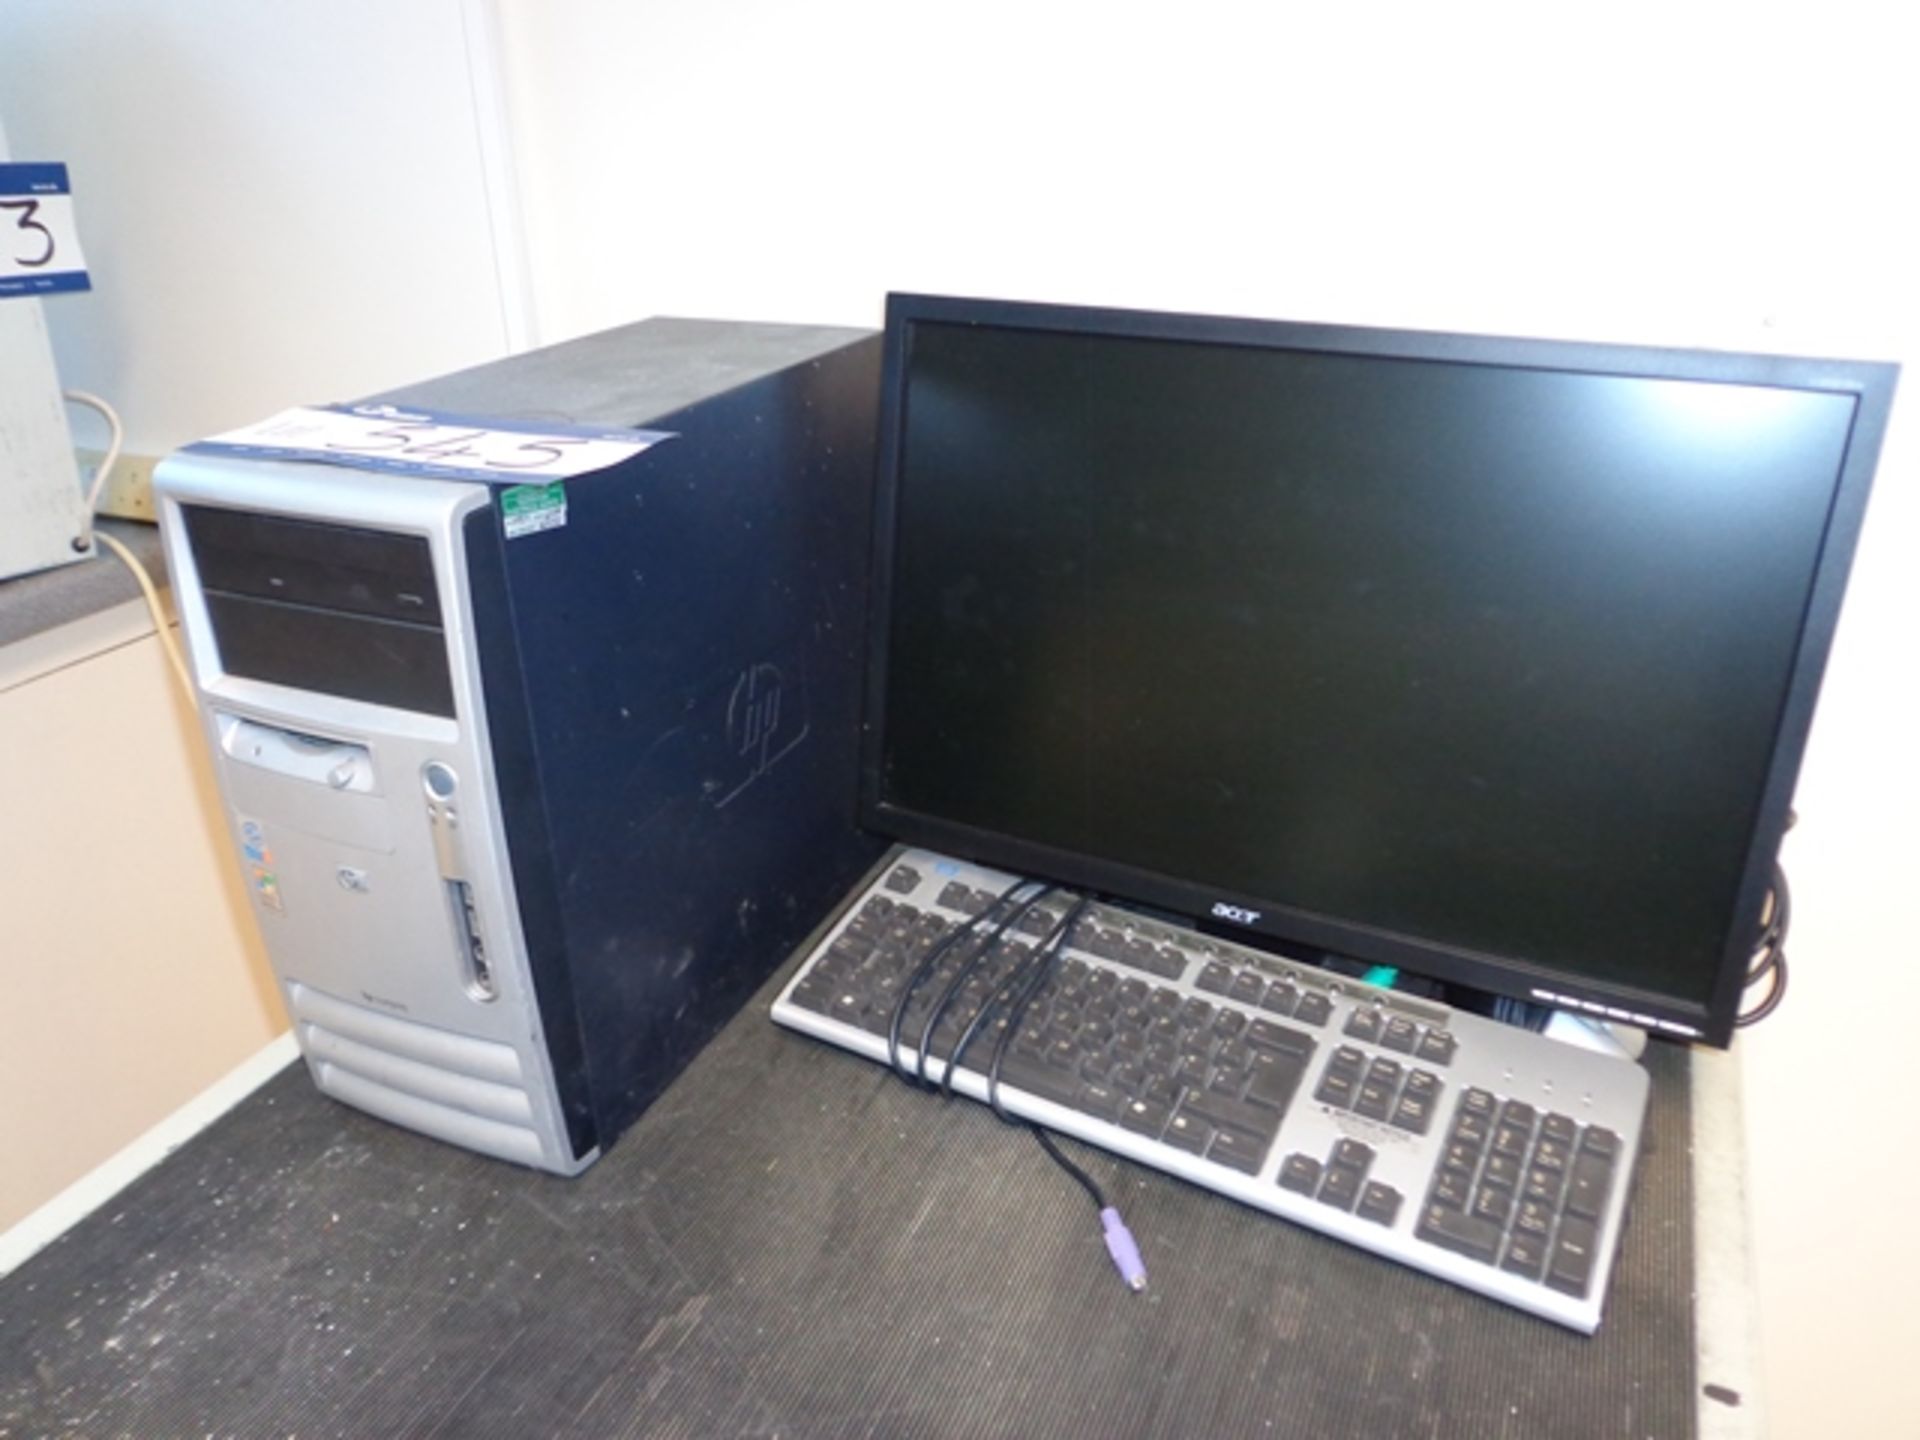 HP Compaq Personal Computer Desktop c/w Monitor/Keyboard and Mouse (Hard Drive Removed)